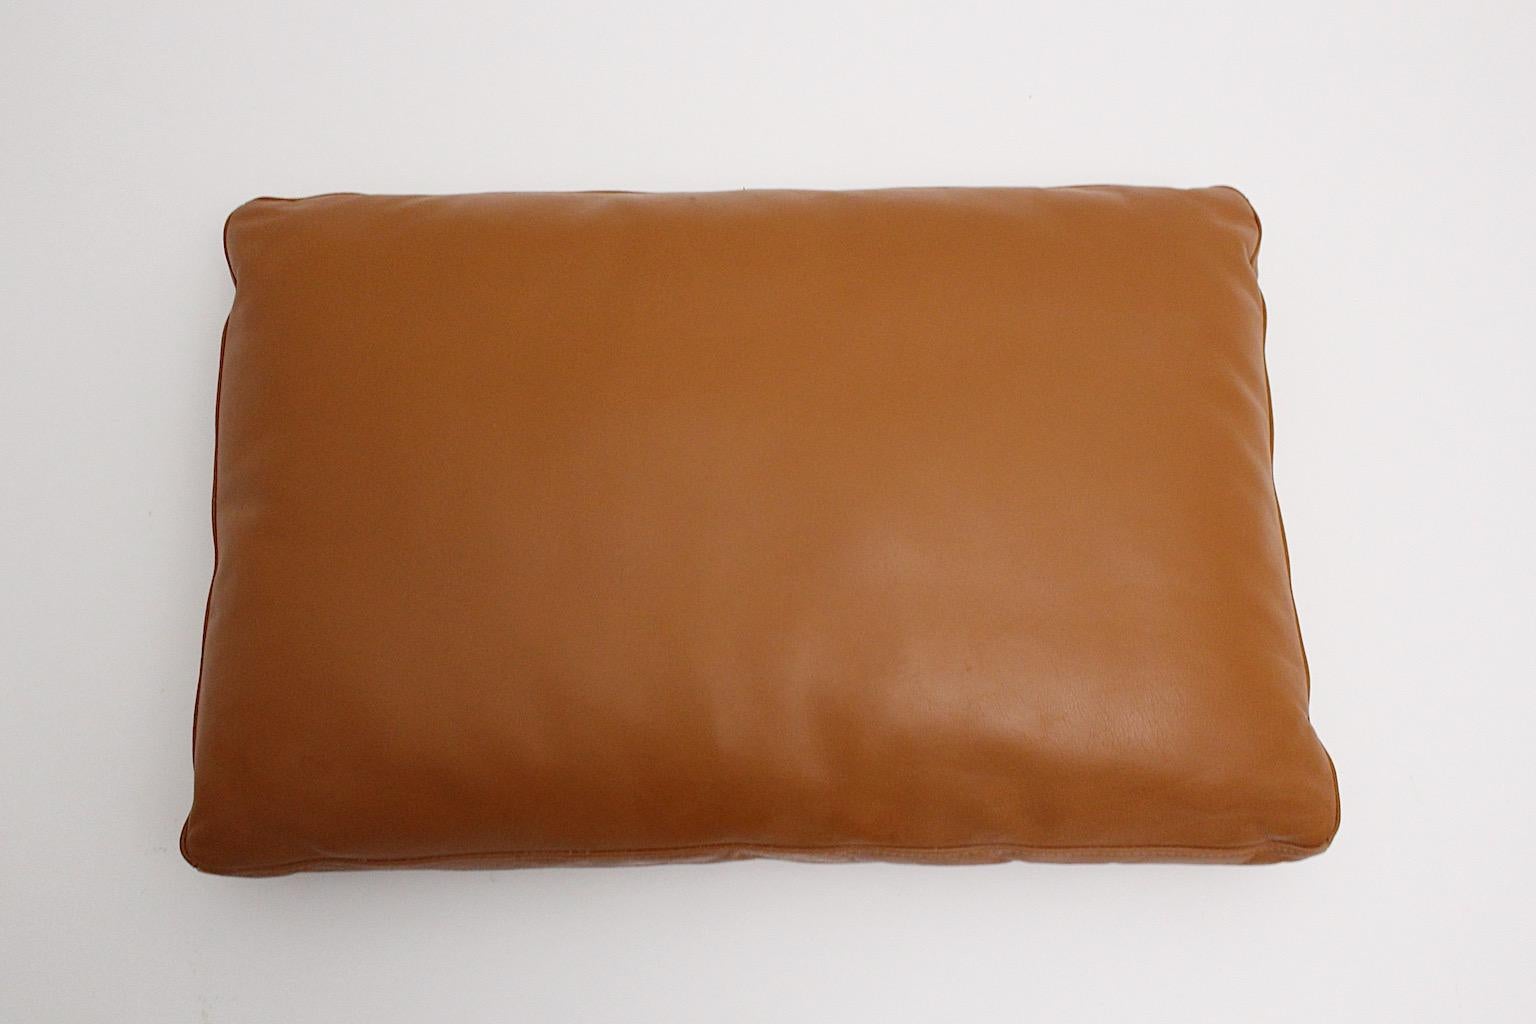 Brown Cognac Stitched Leather Vintage Three Large Pillows, 1970s, Switzerland For Sale 1